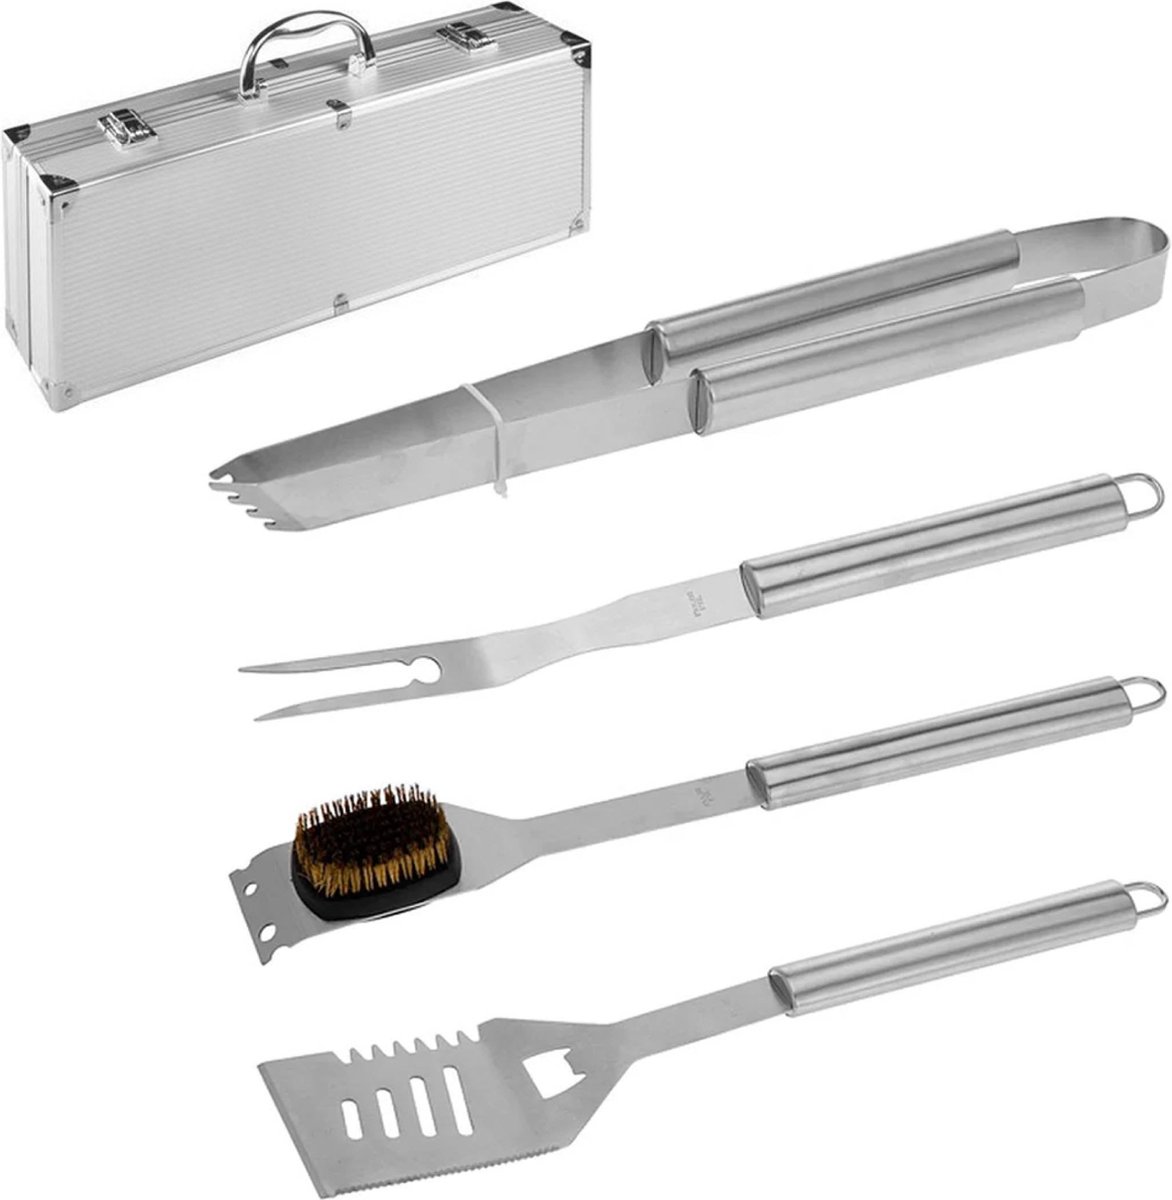 Starie® Luxe Barbecue Set - Barbecue Tang - Barbecue Gereedschap in Koffer - Barbecue Accesoires - Barbecue Borstel